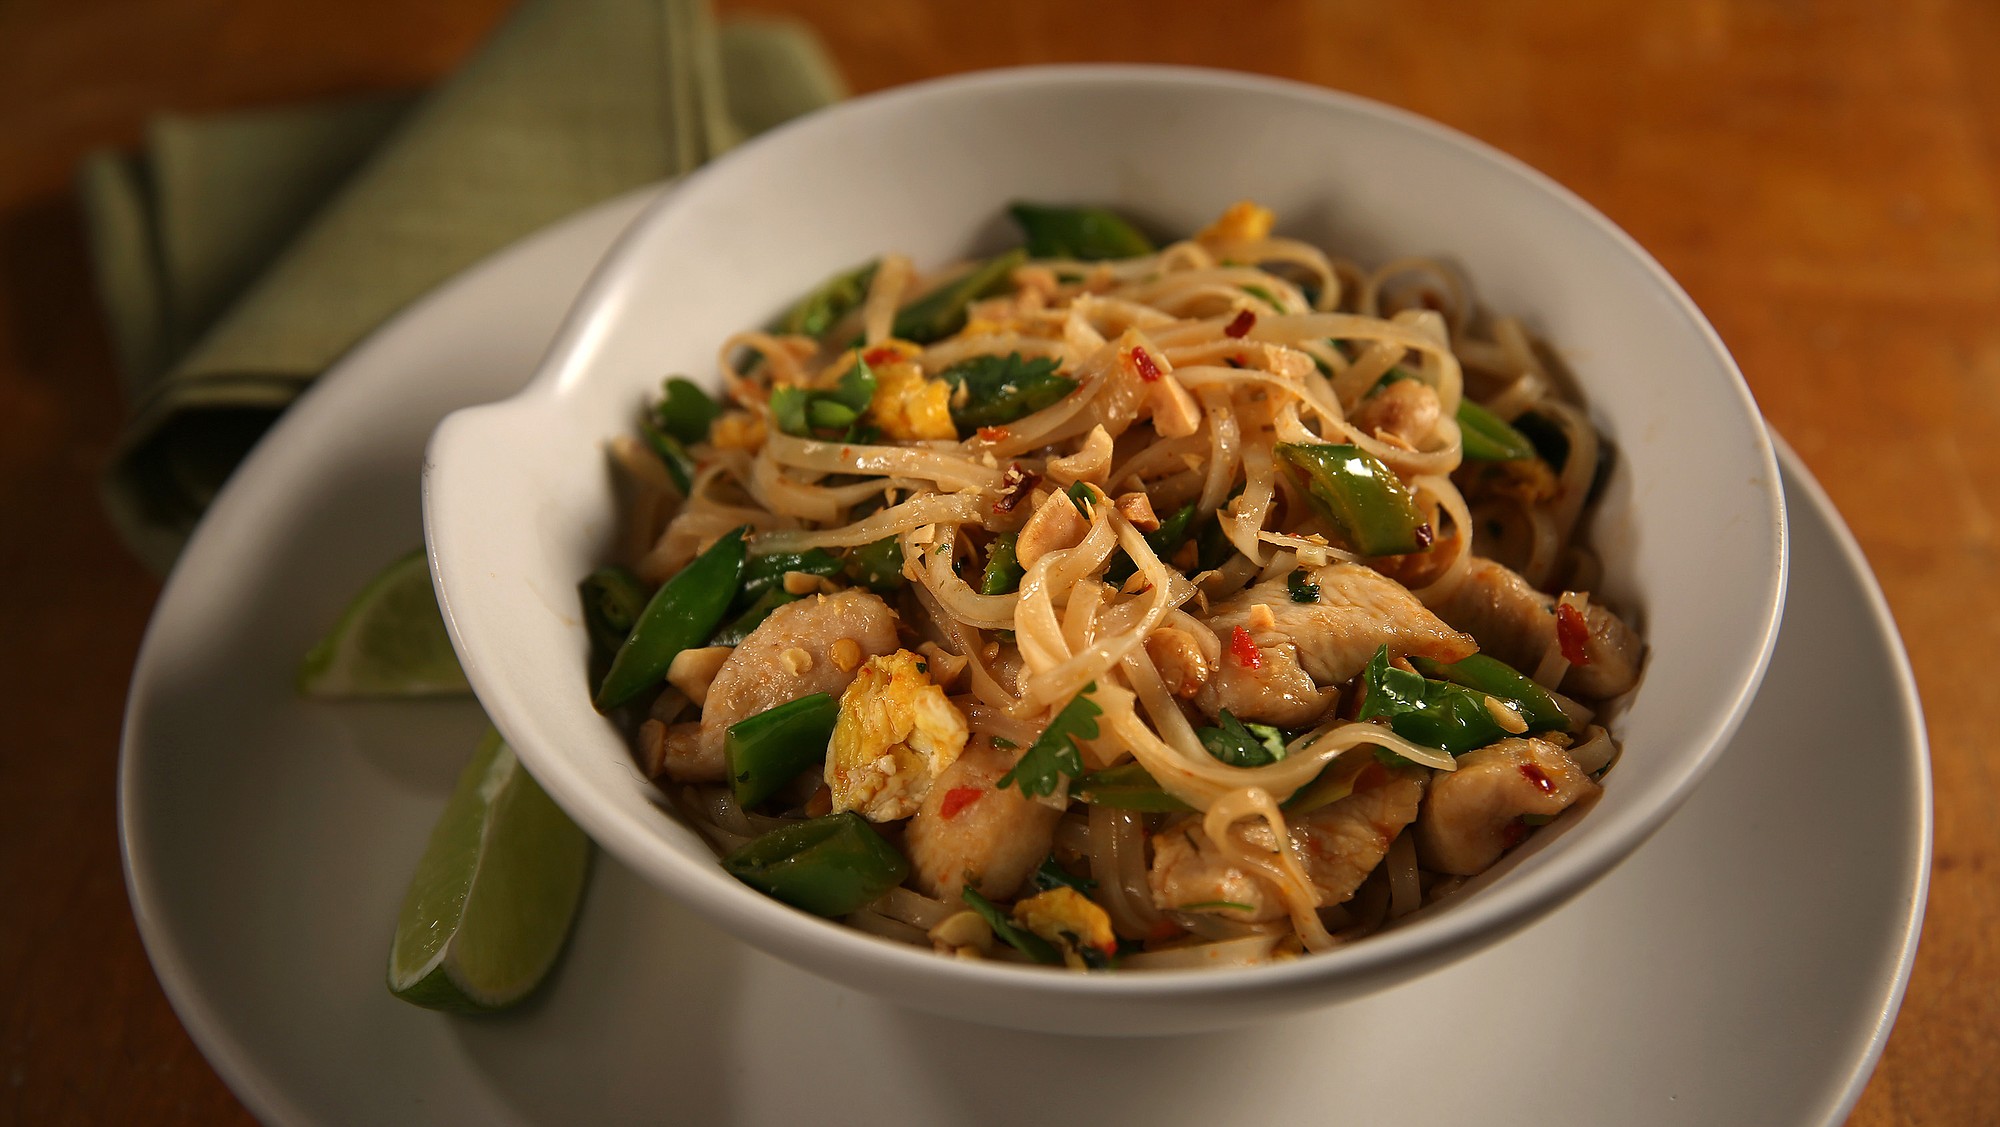 Homemade pad Thai is a tangle of noodles, peppers, spices and peanuts.